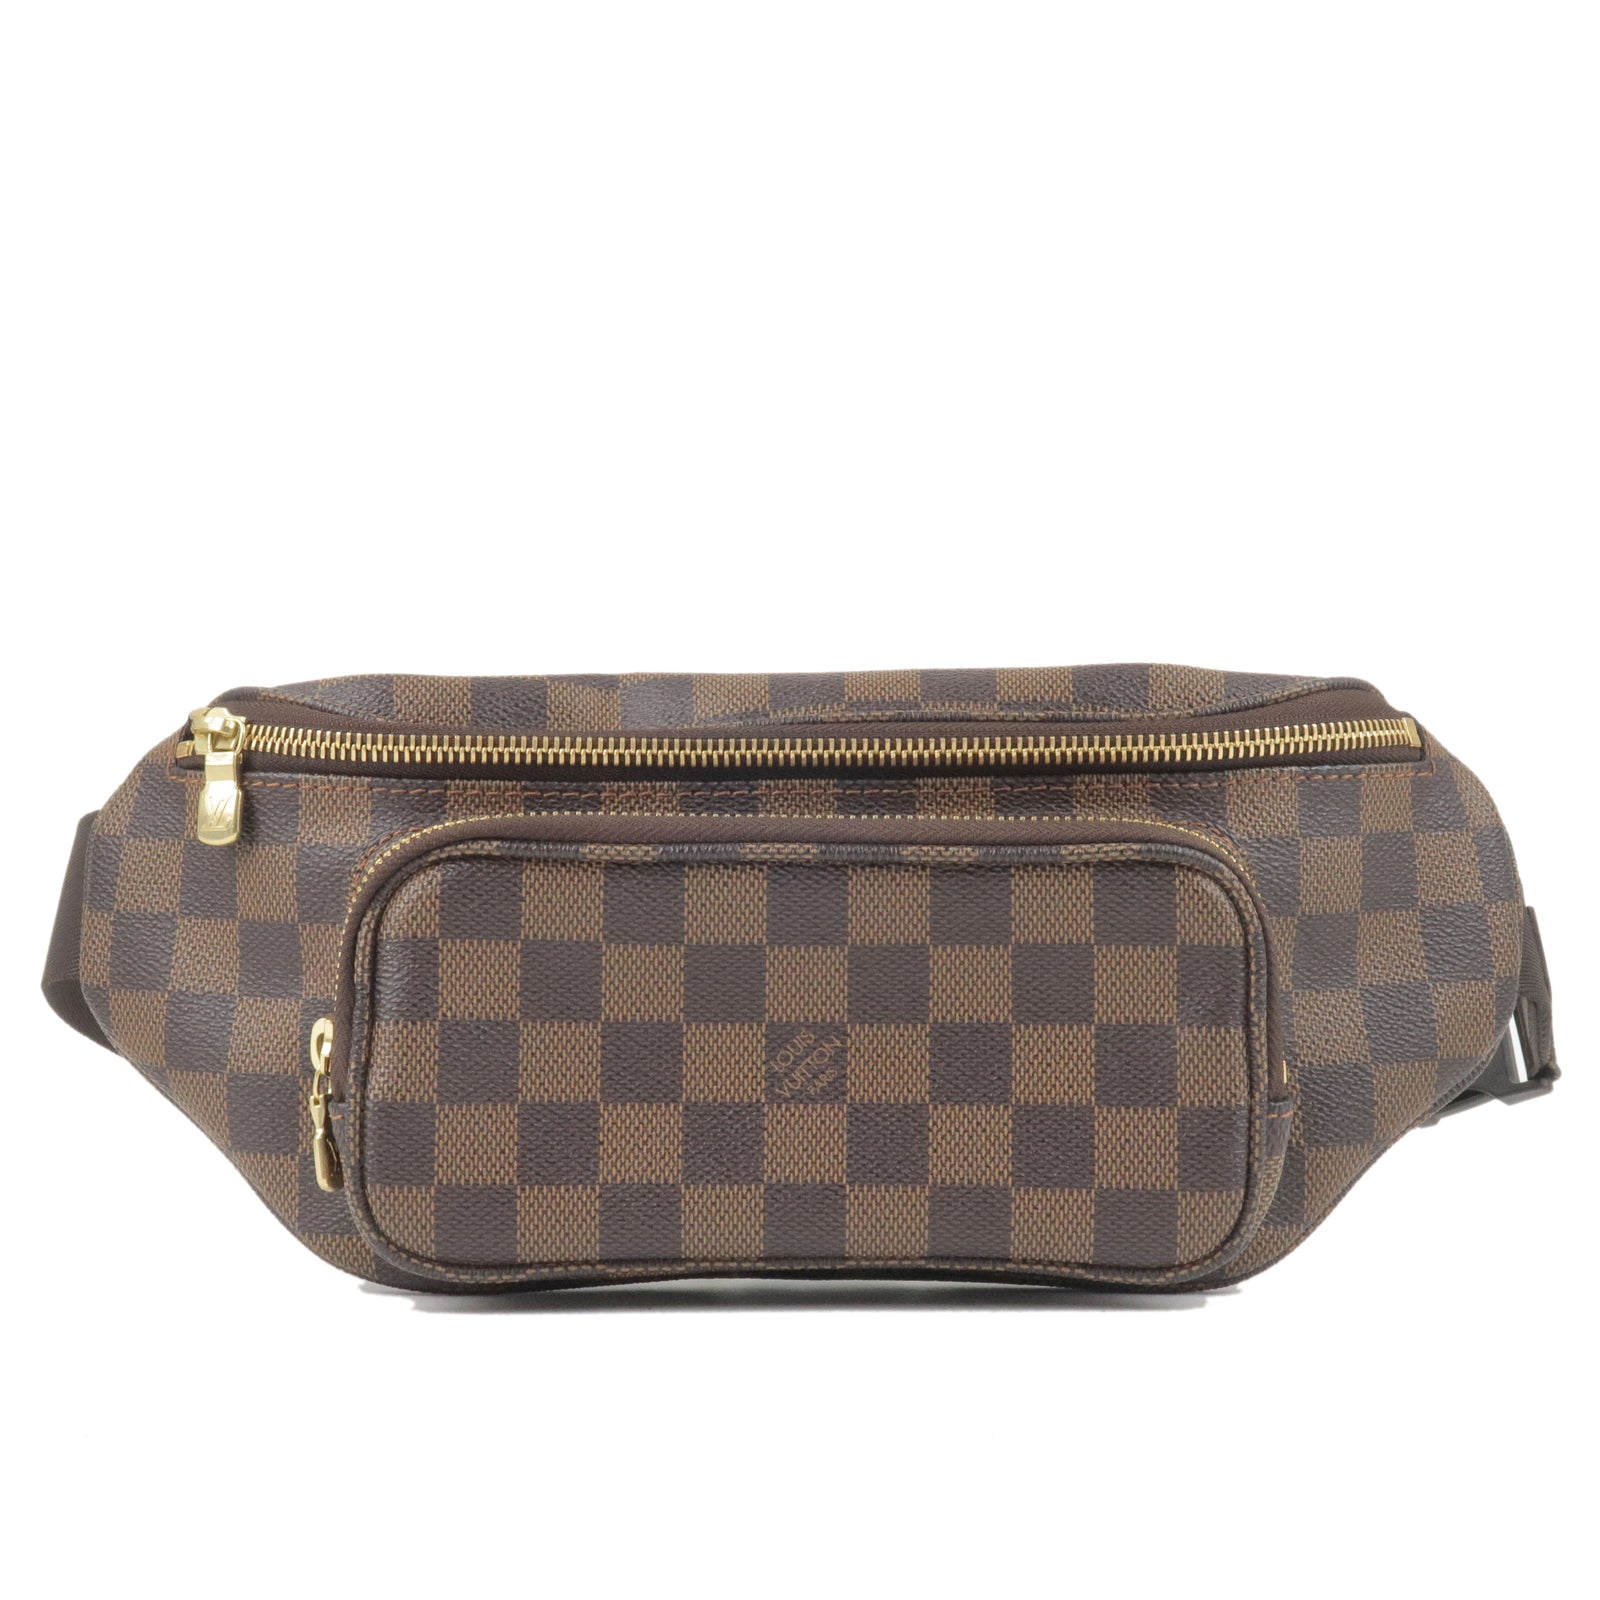 Louis Vuitton 2008 pre-owned Damier Ebene Neverfull MM Tote Bag